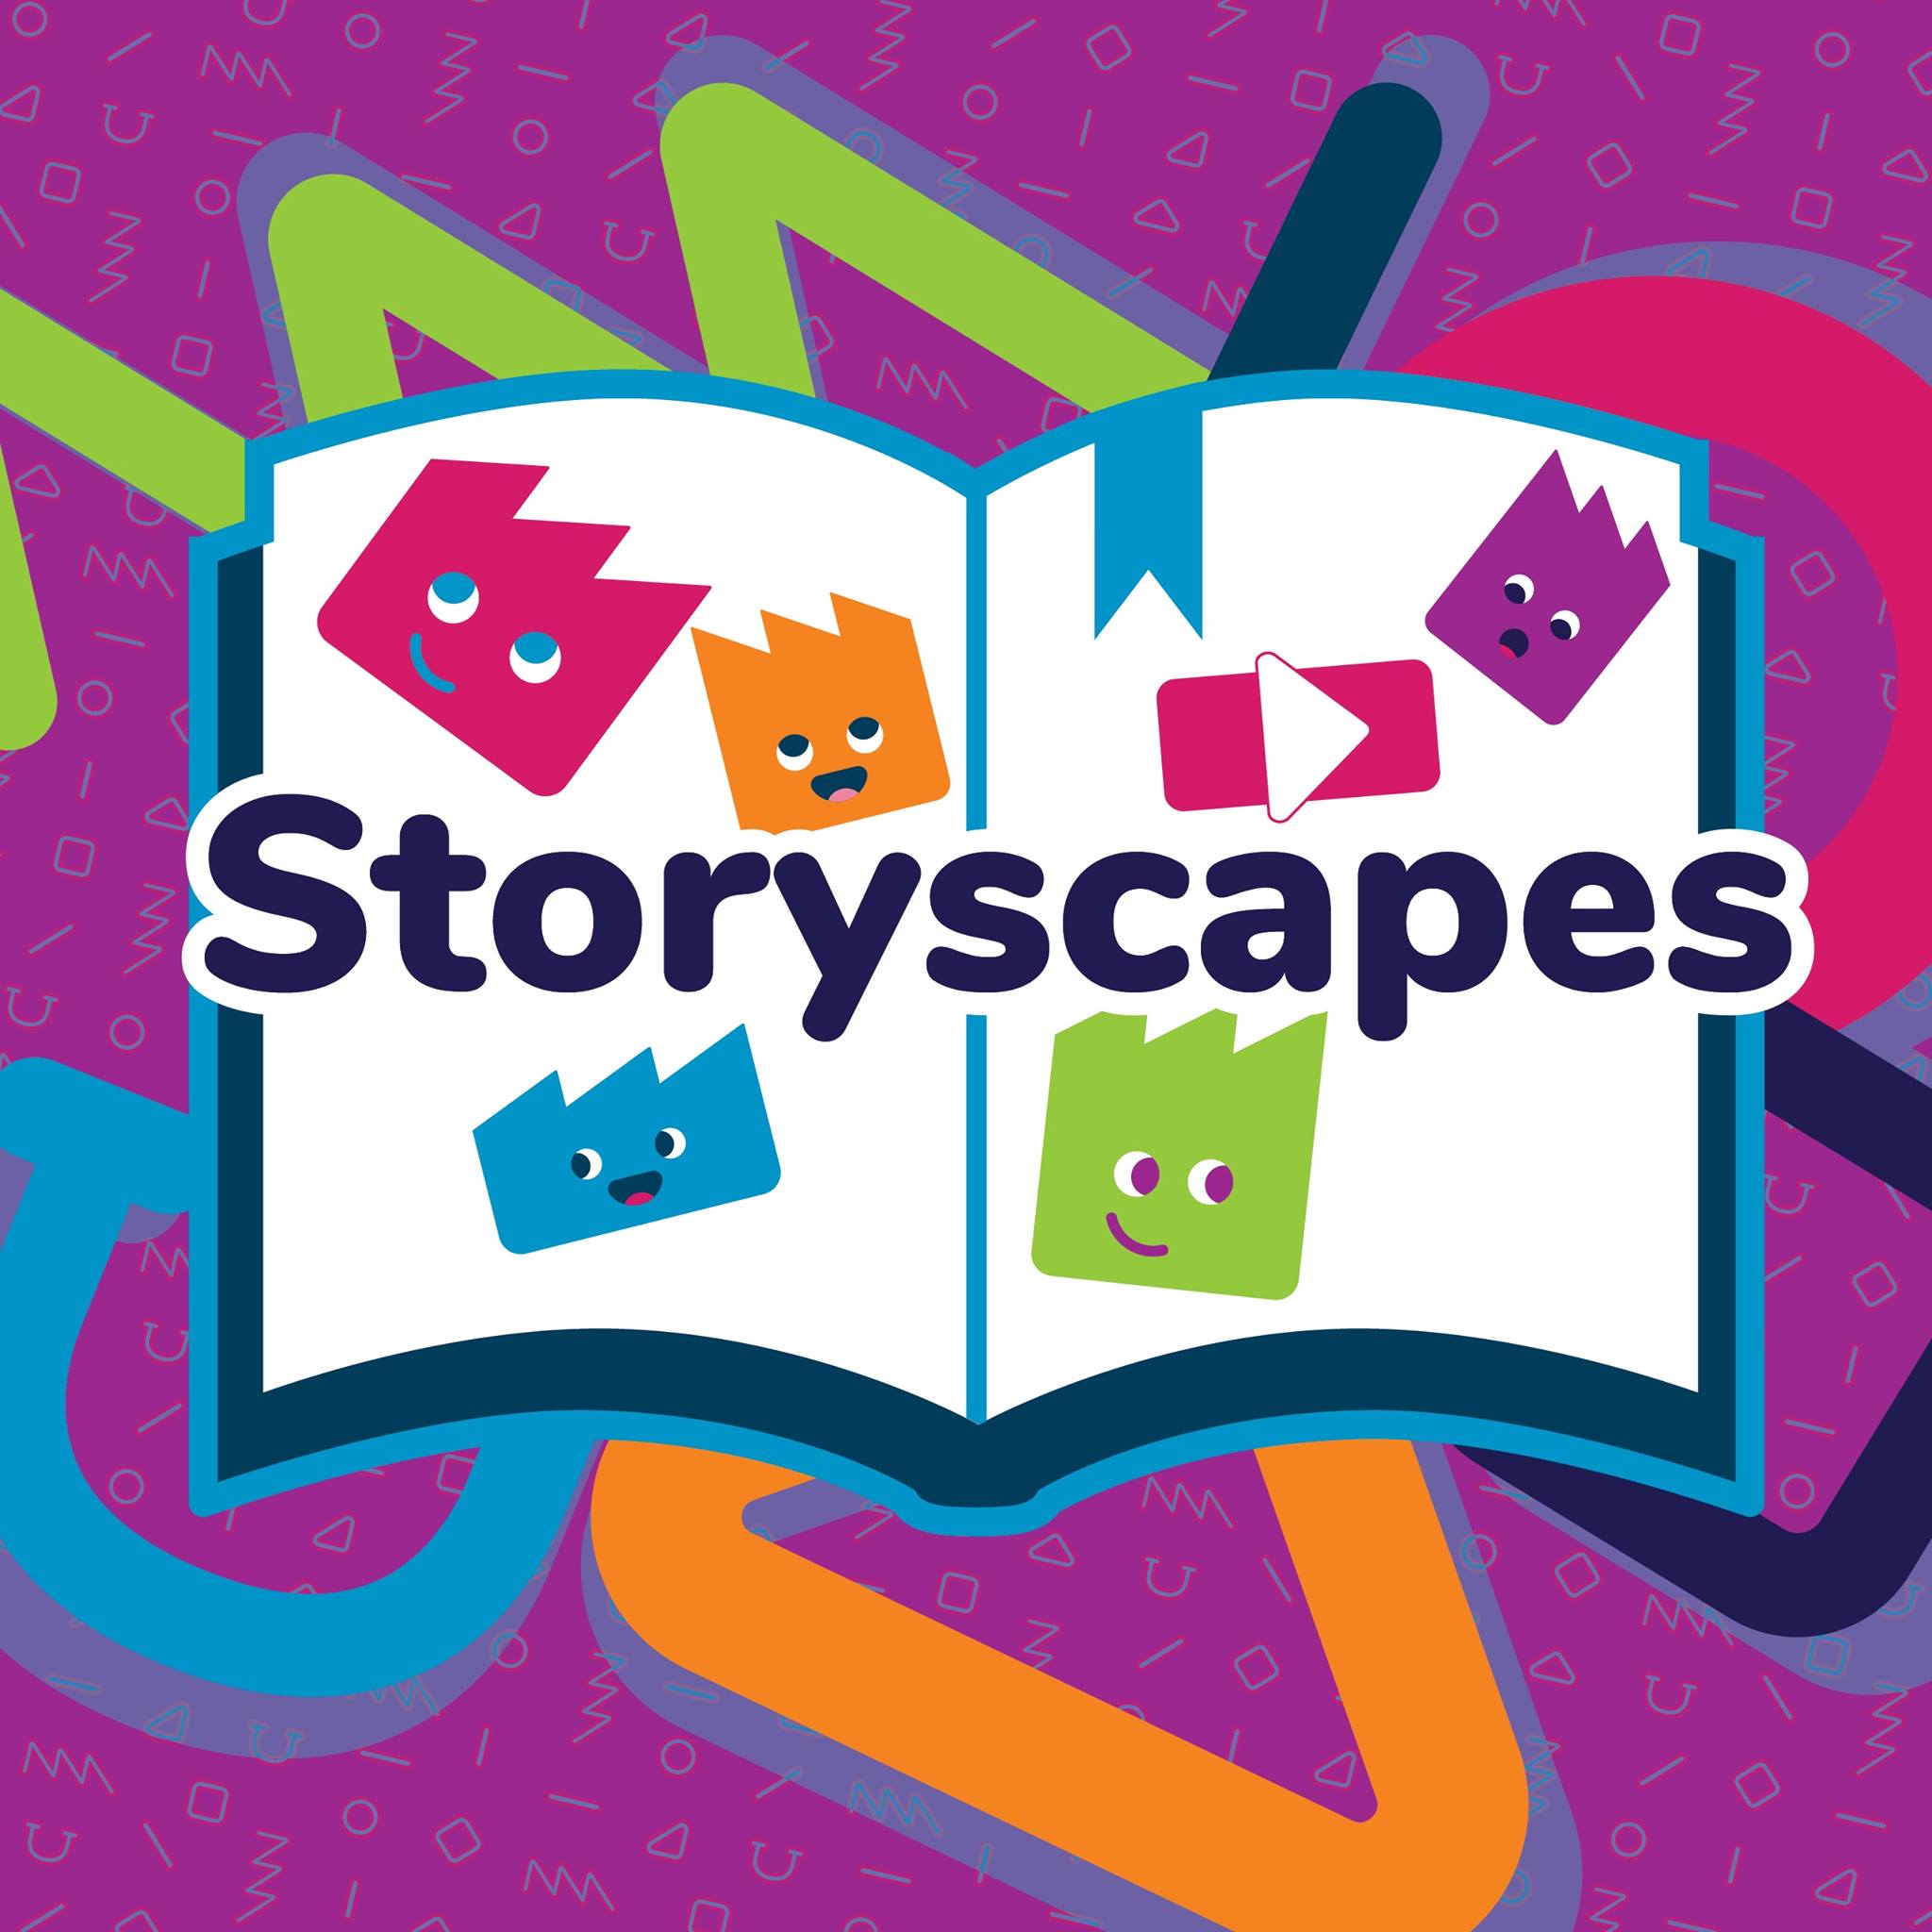 Storyscapes at the Wonderhub